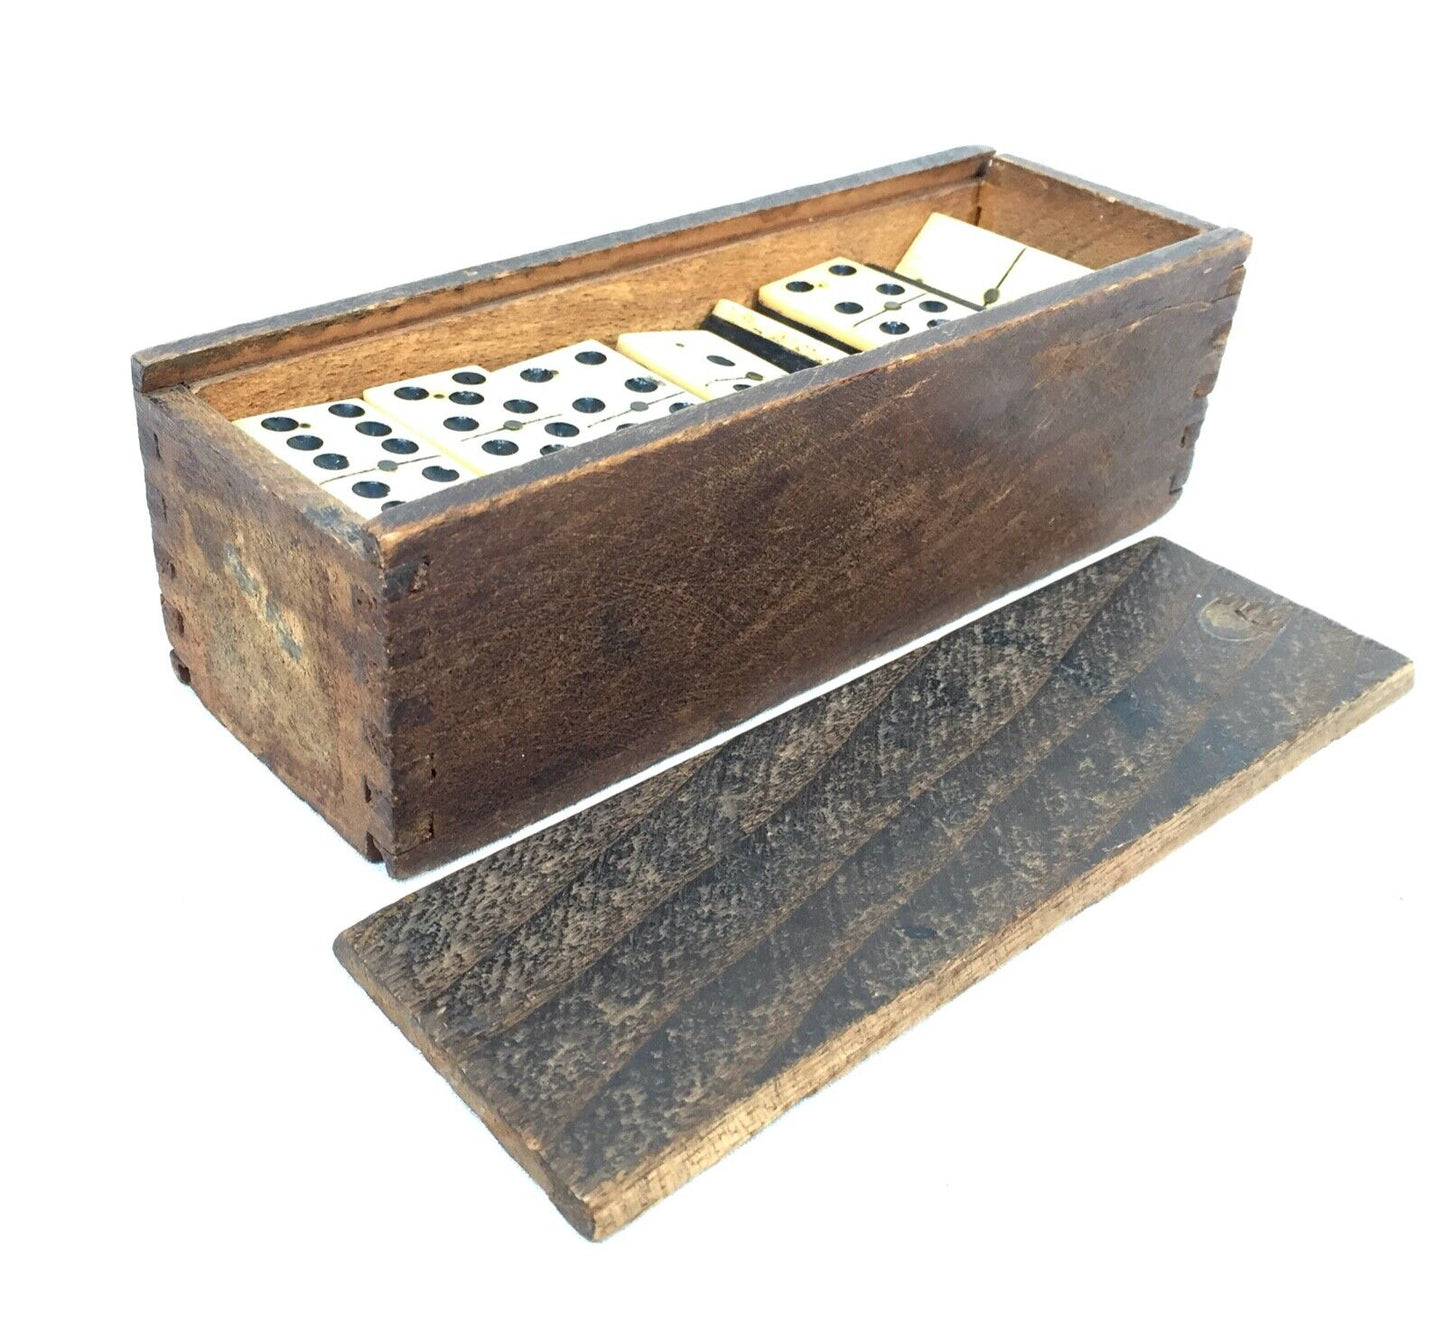 Antique Complete Set of Bone and Ebony Dominos in Wooden Travel Box / Case